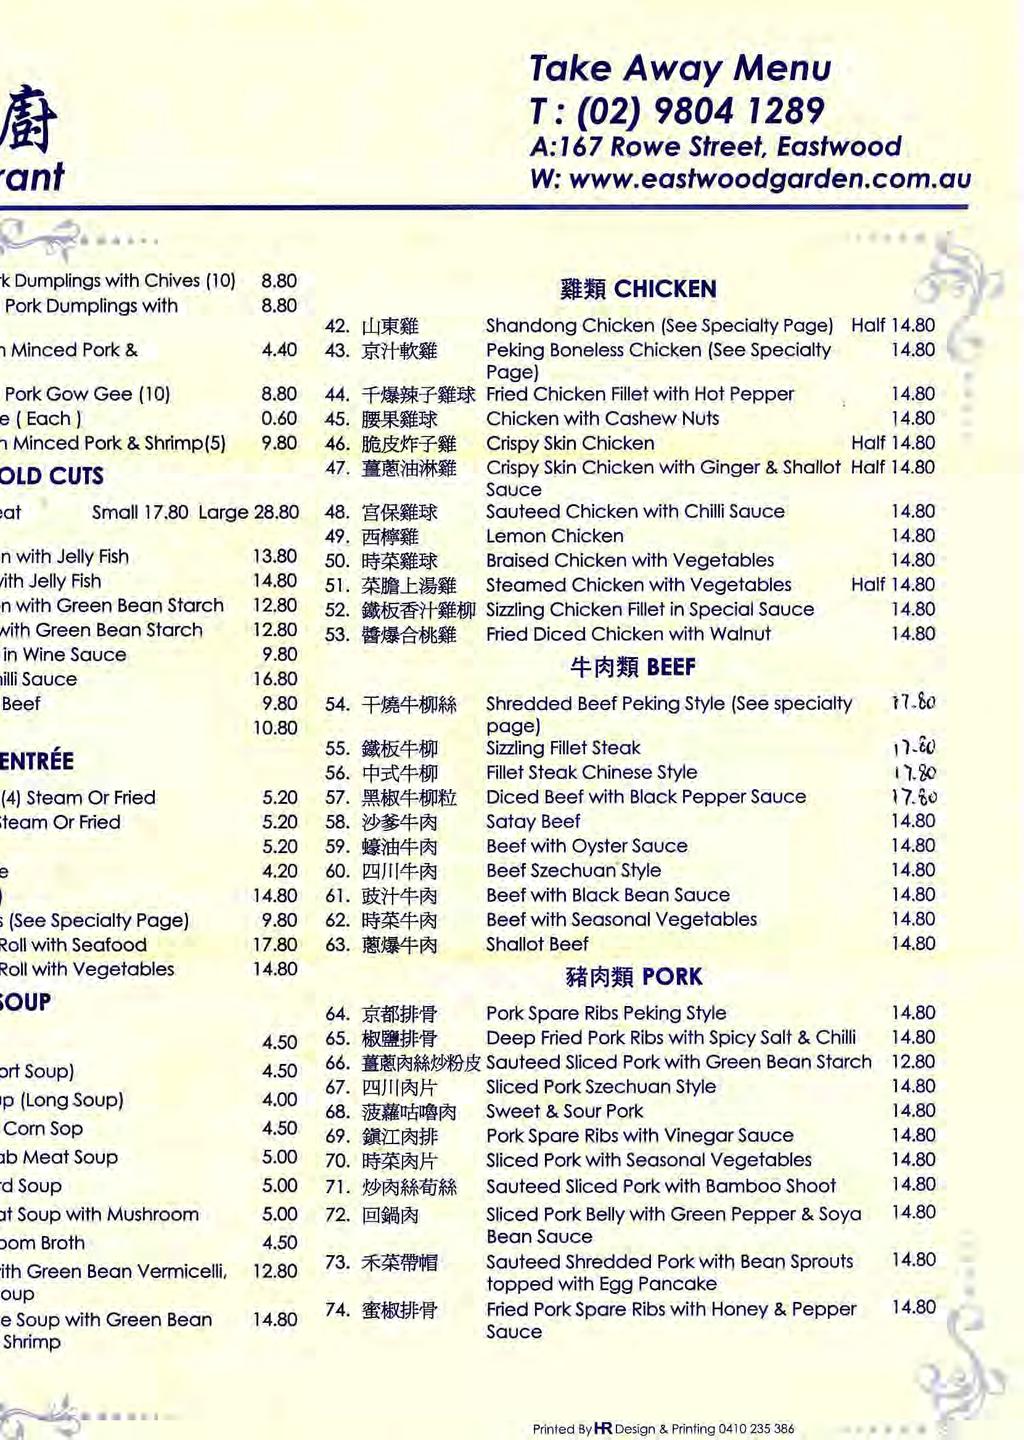 Printed By I-R Design & Printing 0410235386 J1t~ CHICKEN..~ Shandong Chicken (See Specialty Page) Half If. Peking Boneless Chicken (See Specialty ~)' Page).. 44.